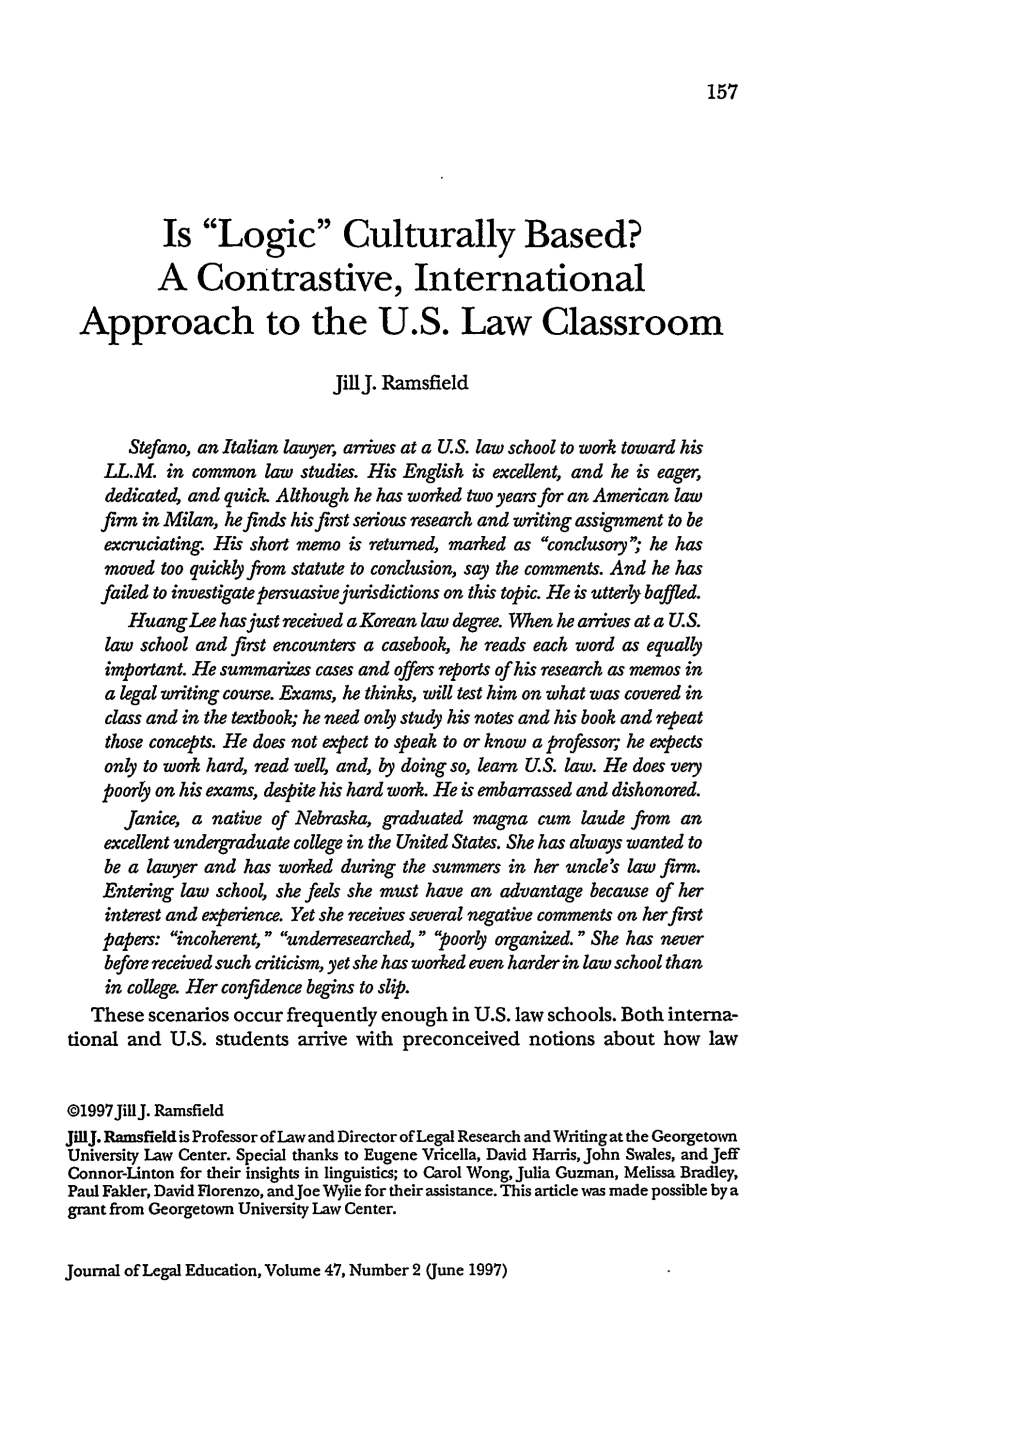 Is "Logic" Culturally Based? a Contrastive, International Approach to the U.S